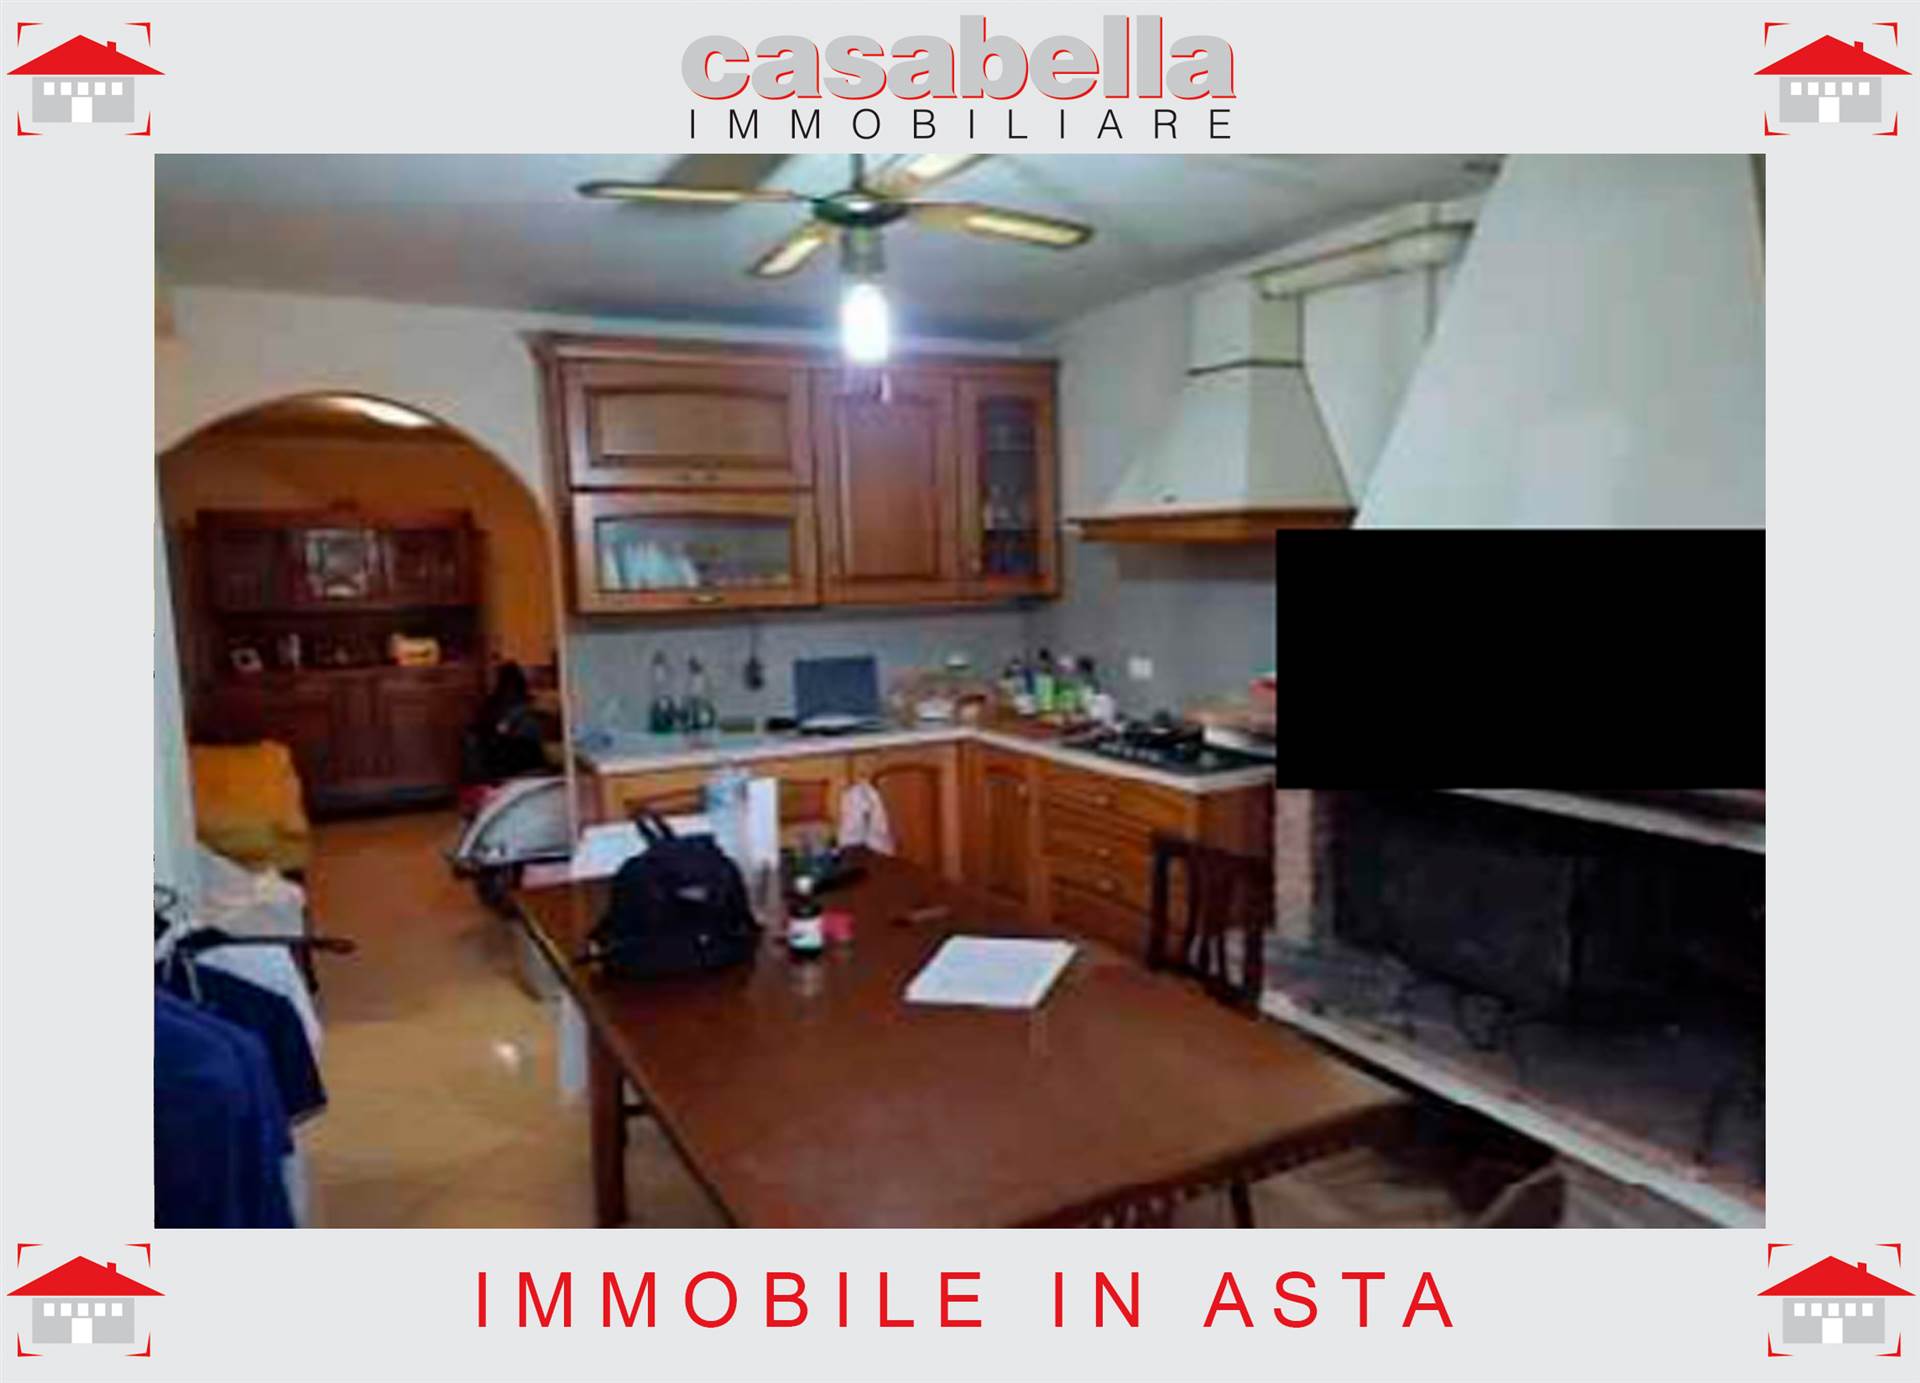 BRONCIGLIANO, SCANDICCI, Apartment for sale of 71 Sq. mt., Good condition, Heating Individual heating system, Energetic class: G, placed at Ground on 